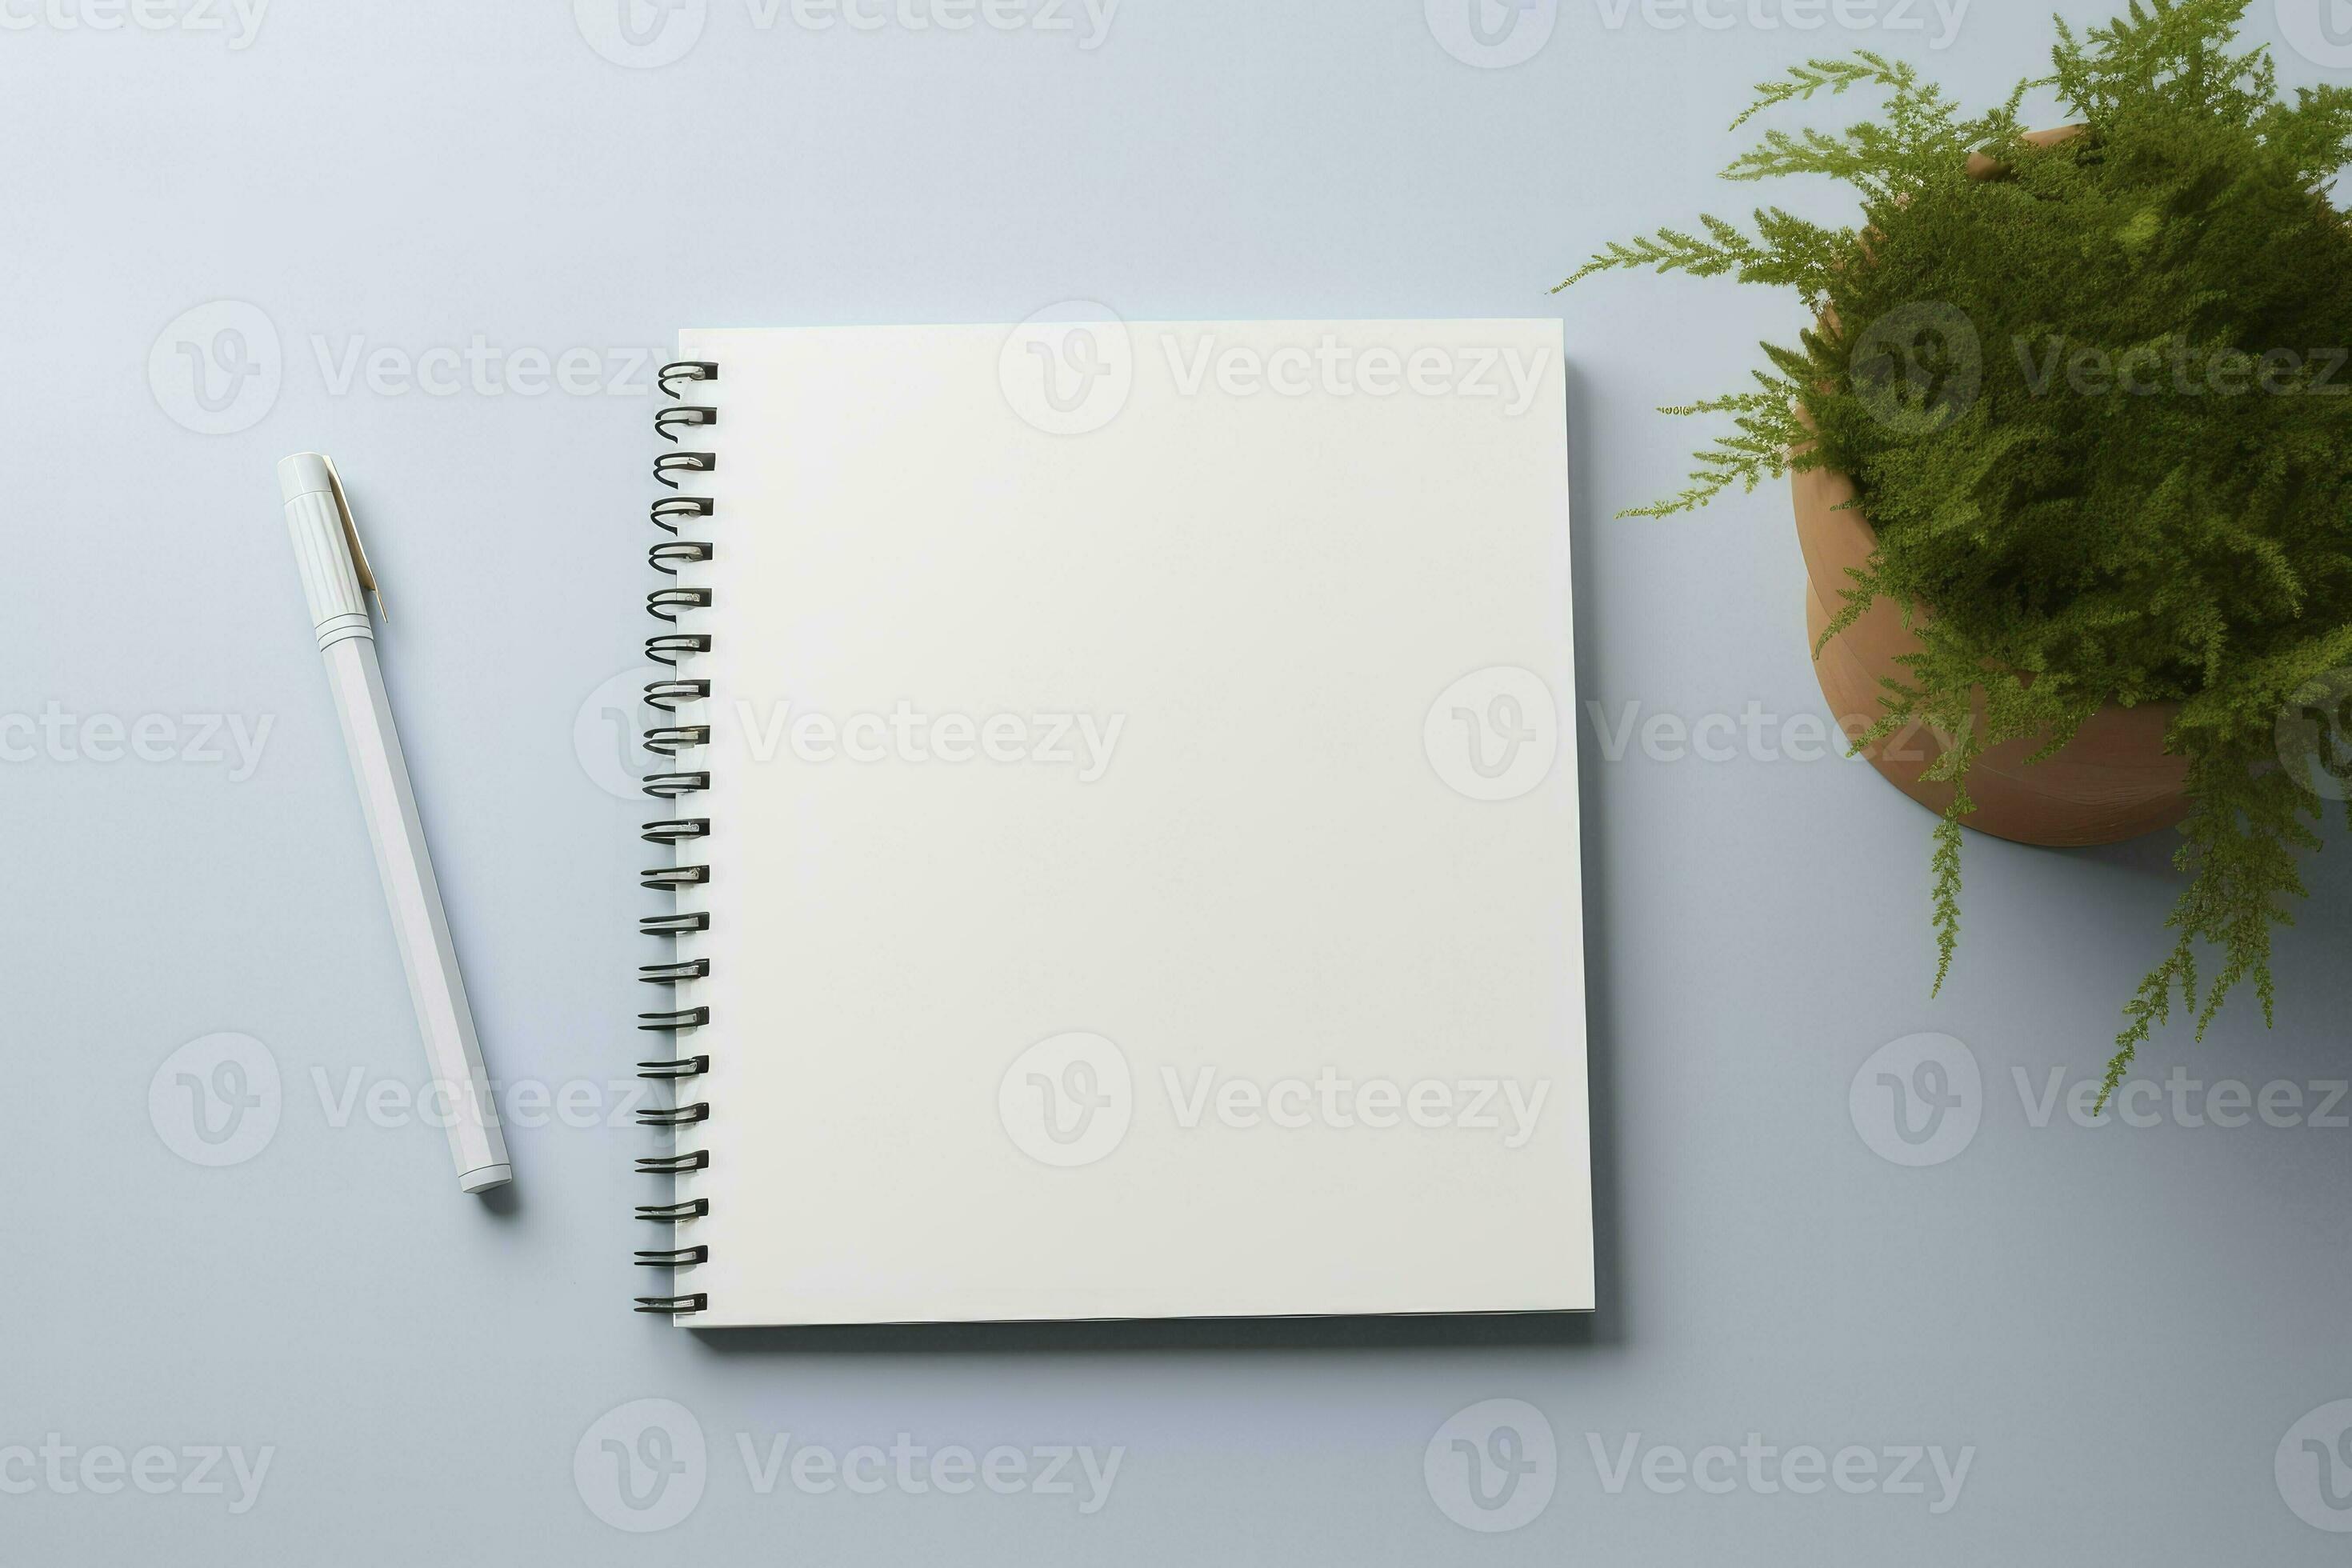 Blank of Black Notebook Mockup Design Graphic by Muhammad Rizky